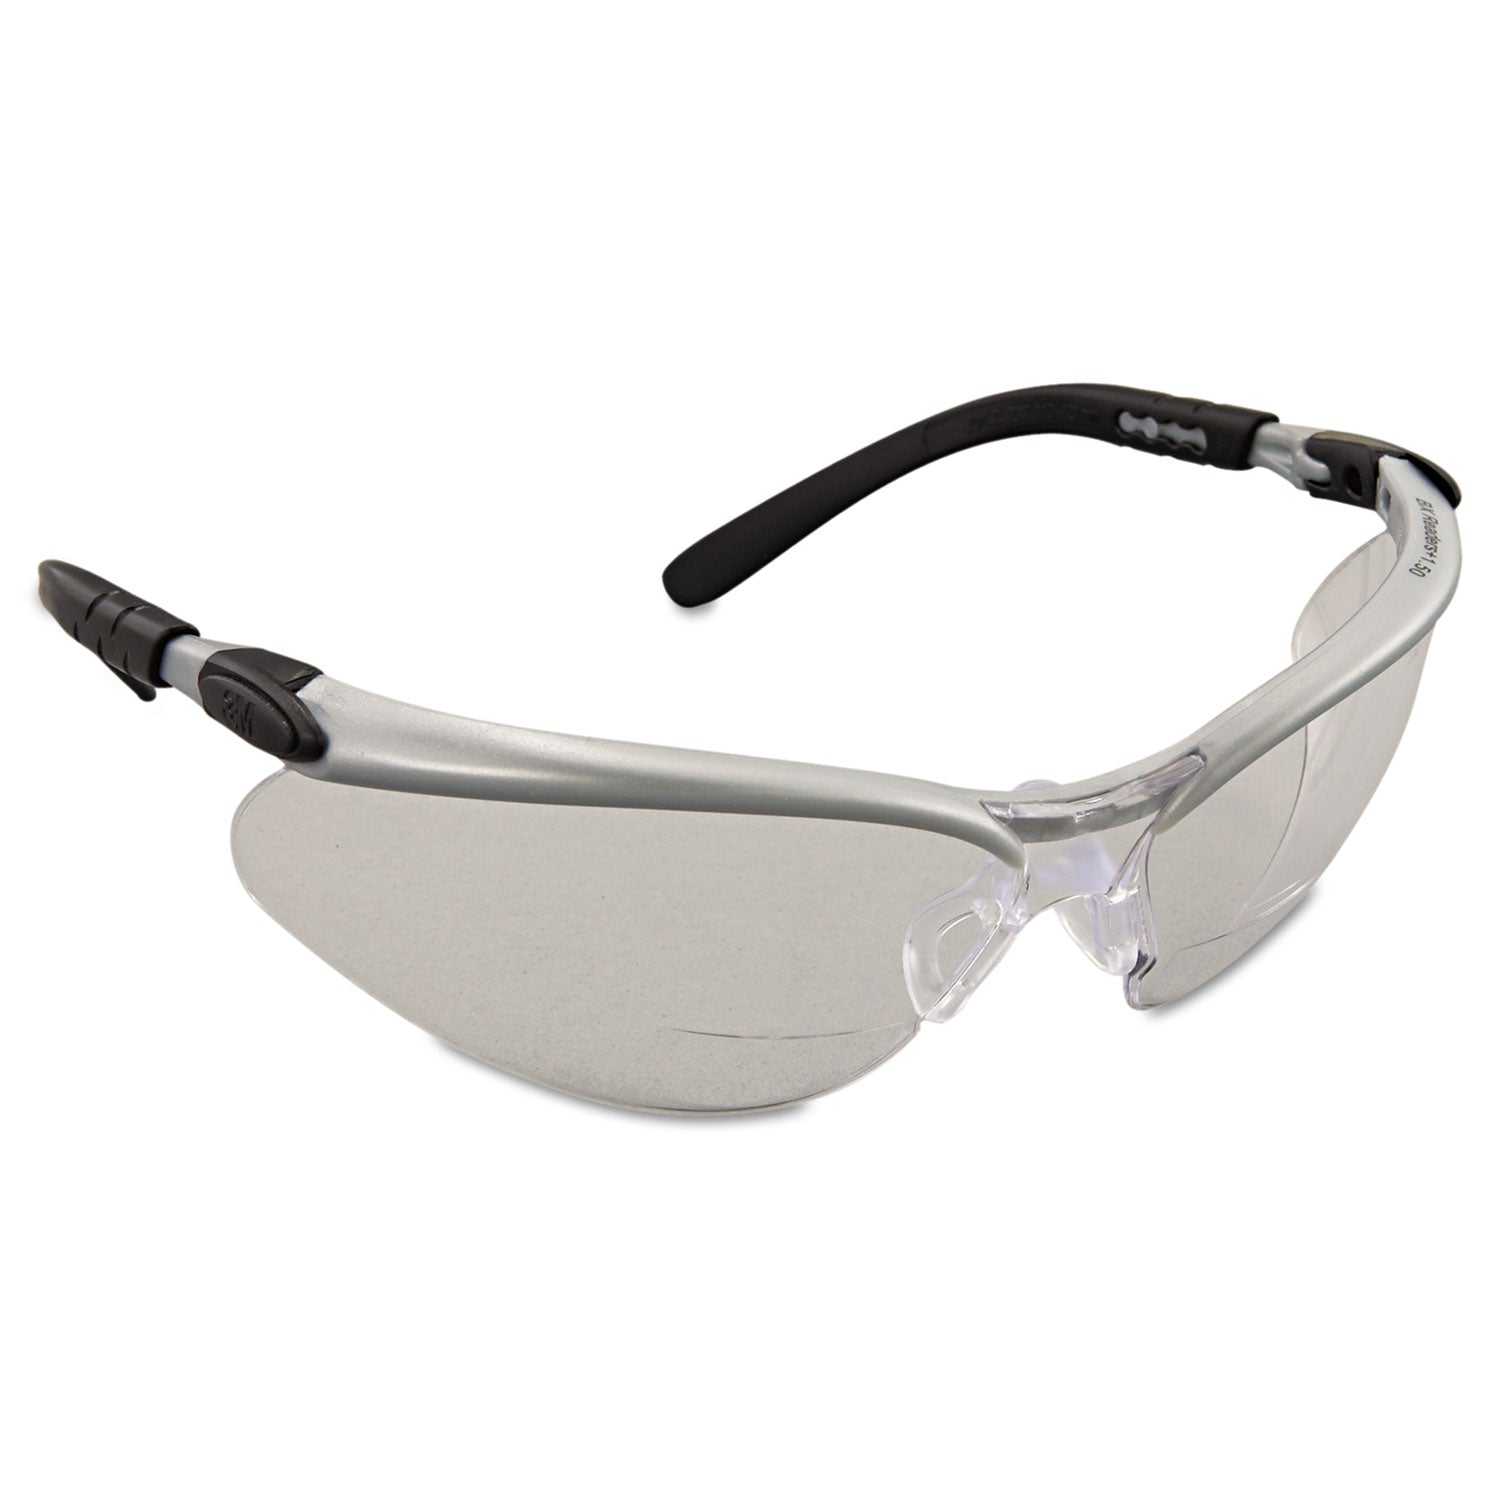 bx-molded-in-diopter-safety-glasses-15+-diopter-strength-silver-black-frame-clear-lens-20-box_mmm113740000020 - 2